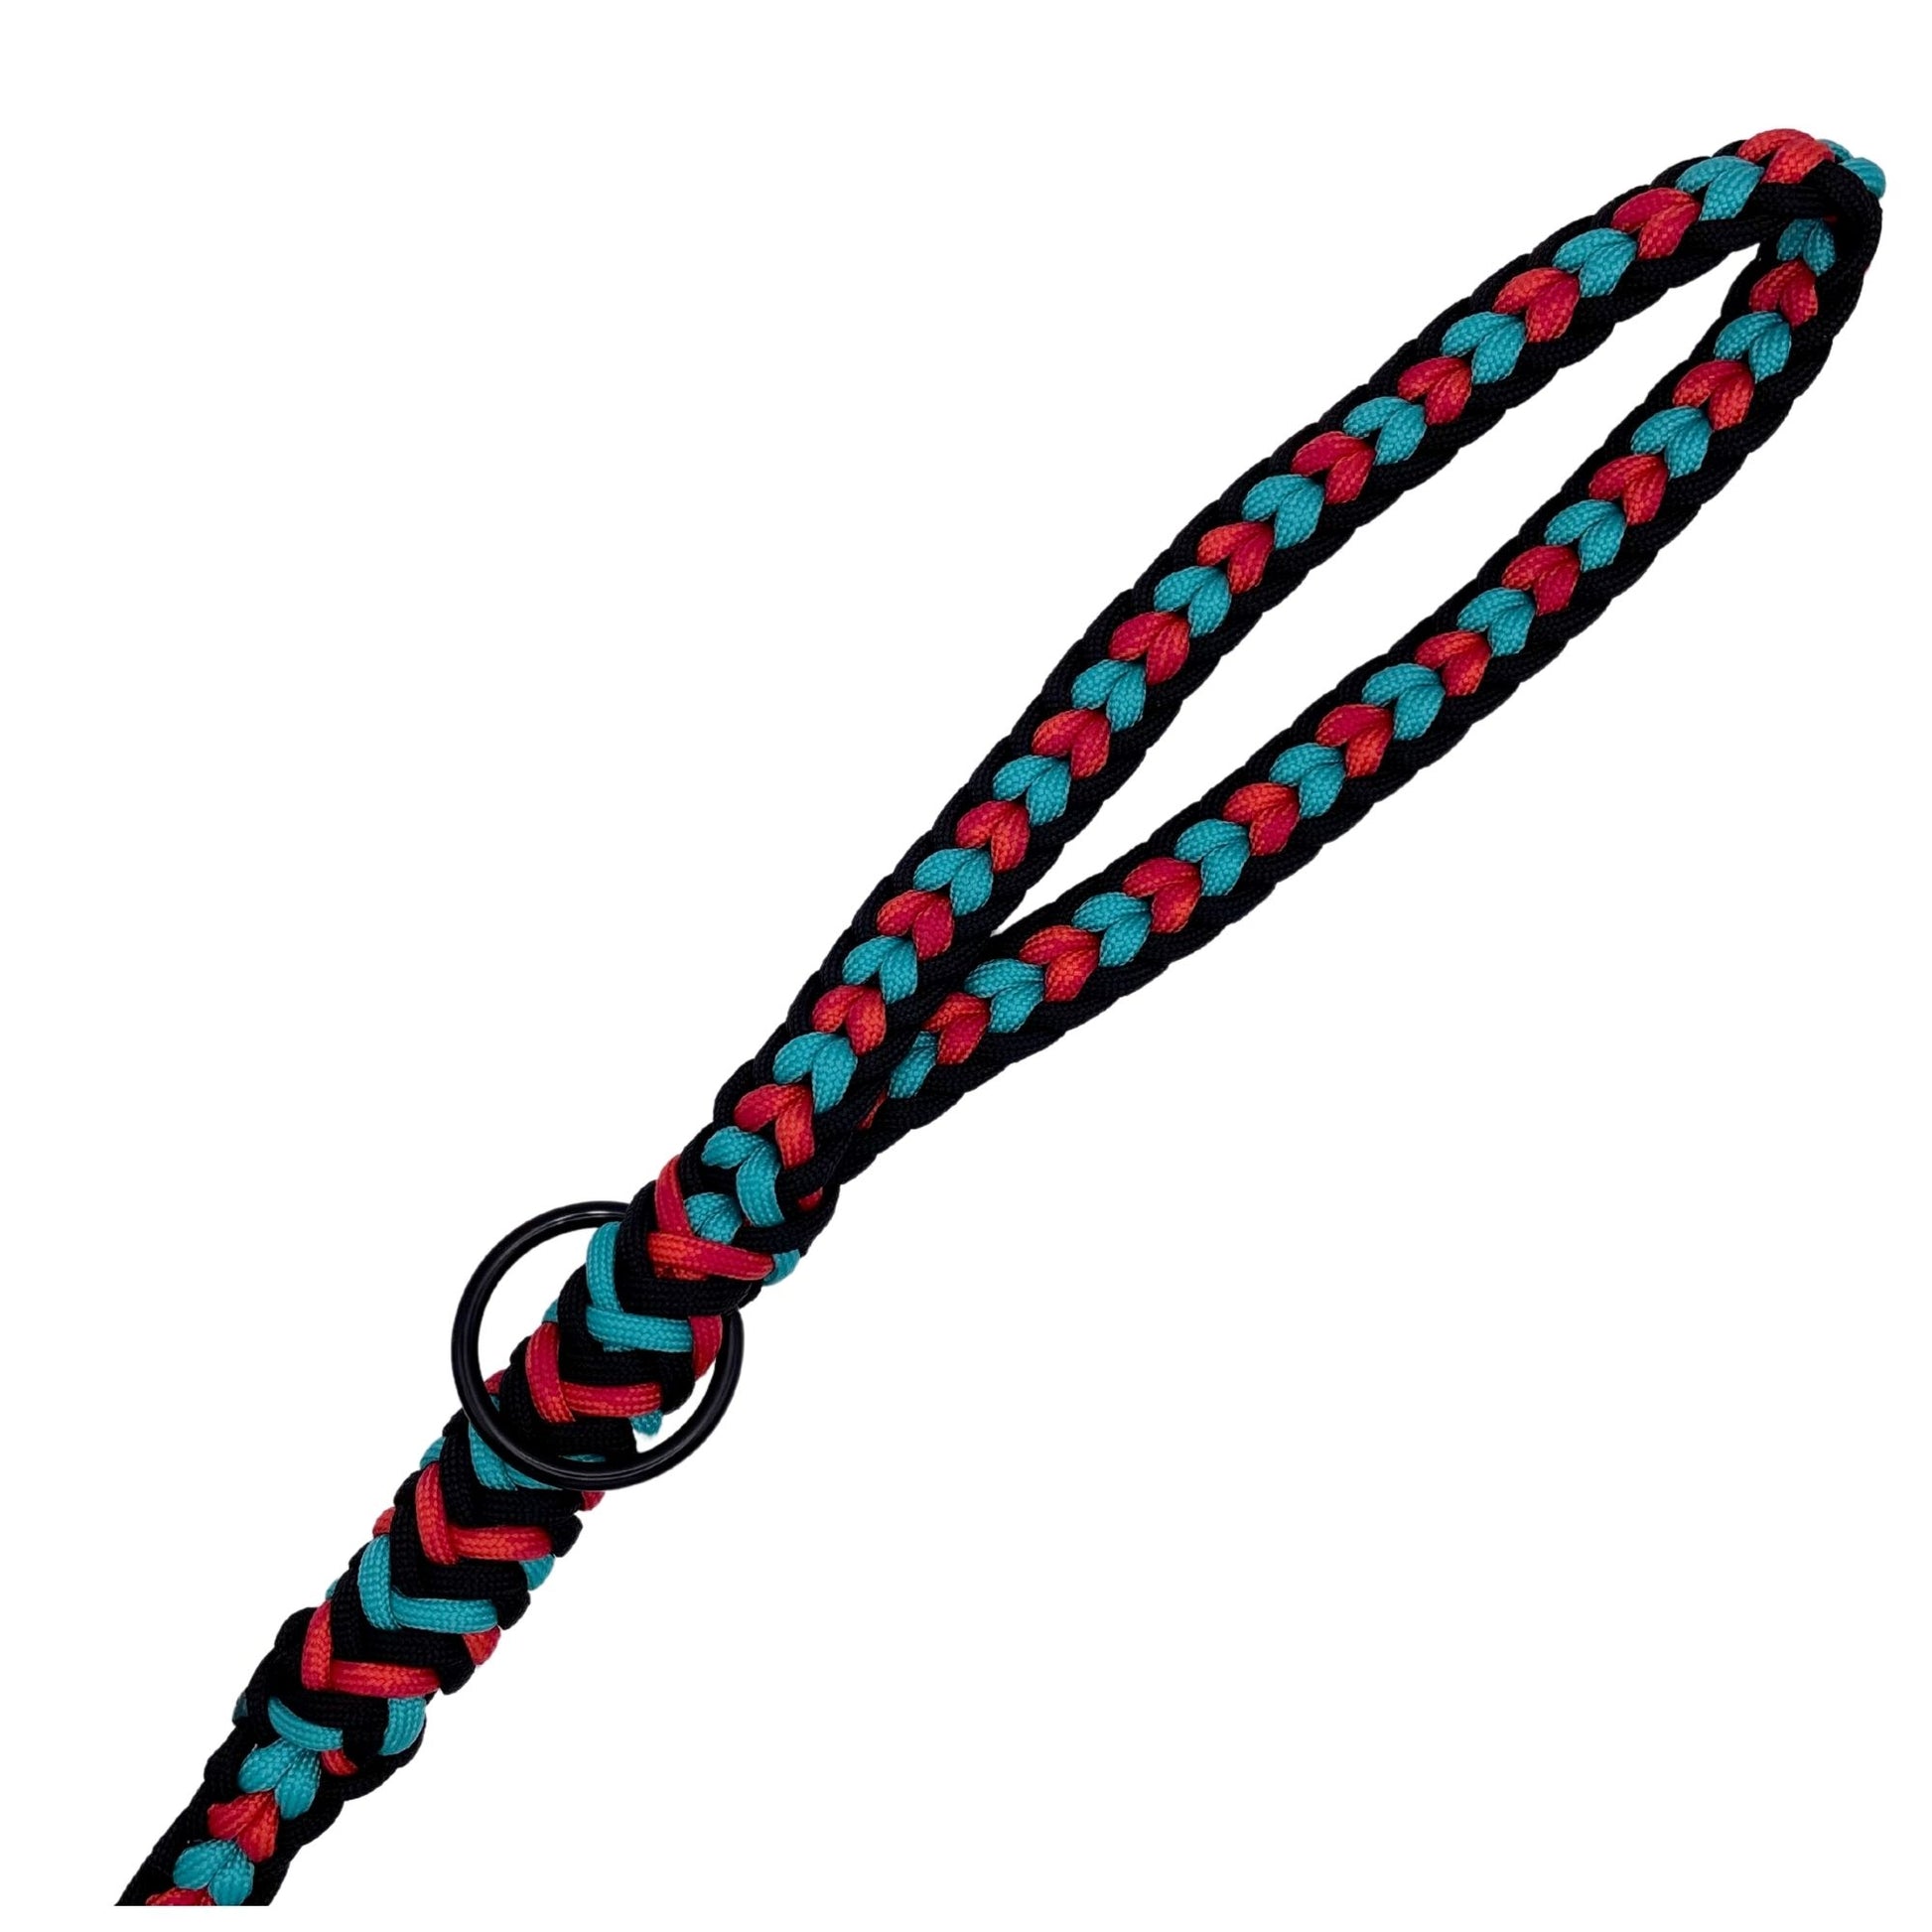 Yamnuska Paracord Dog Leash Handle with Swivel Carabiner In Teal Orange and Red